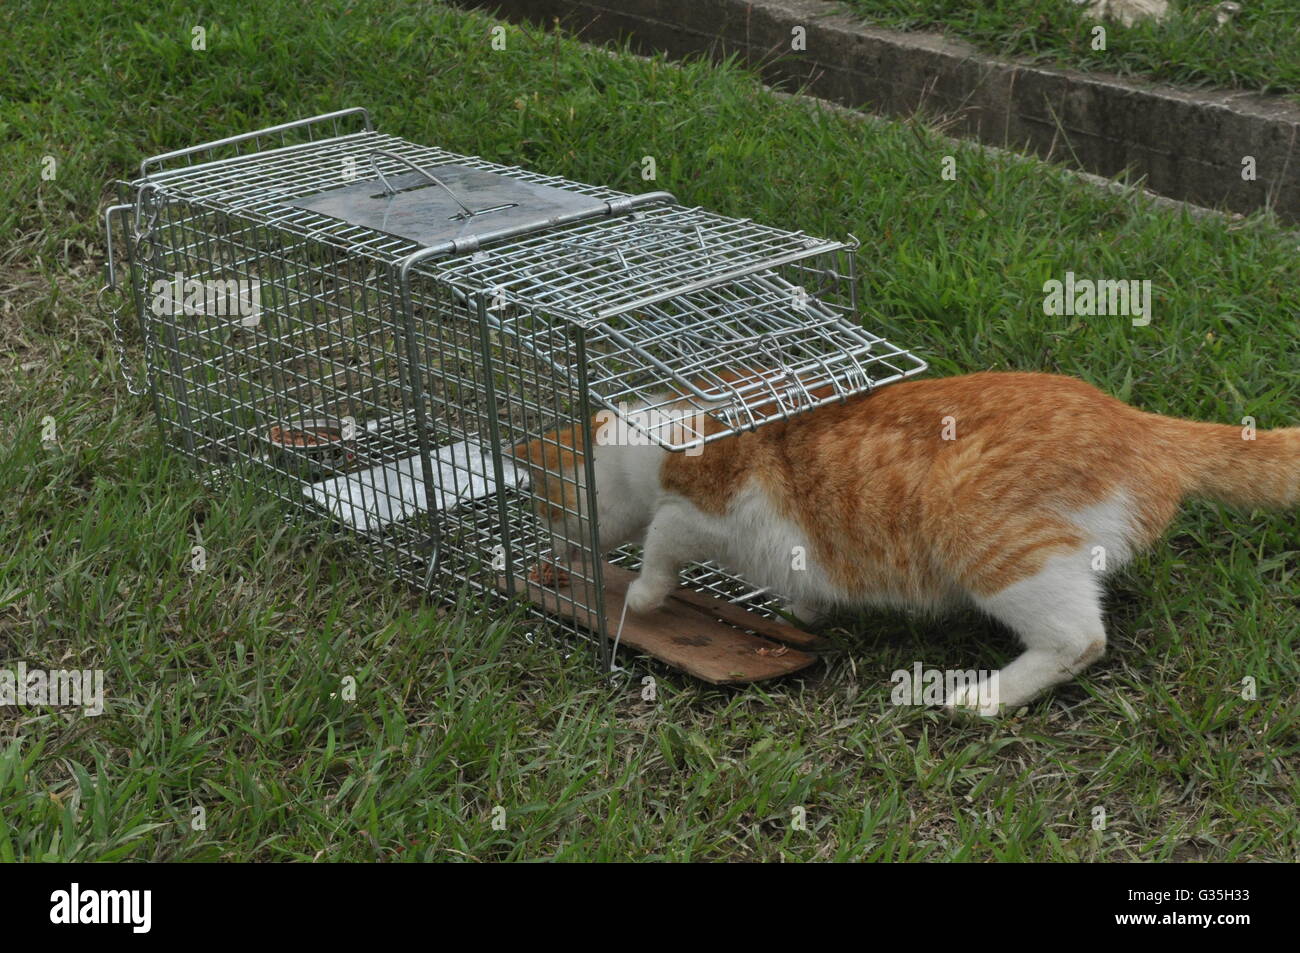 https://c8.alamy.com/comp/G35H33/cat-being-trapped-to-be-sterilized-during-a-tnr-program-okinawa-G35H33.jpg